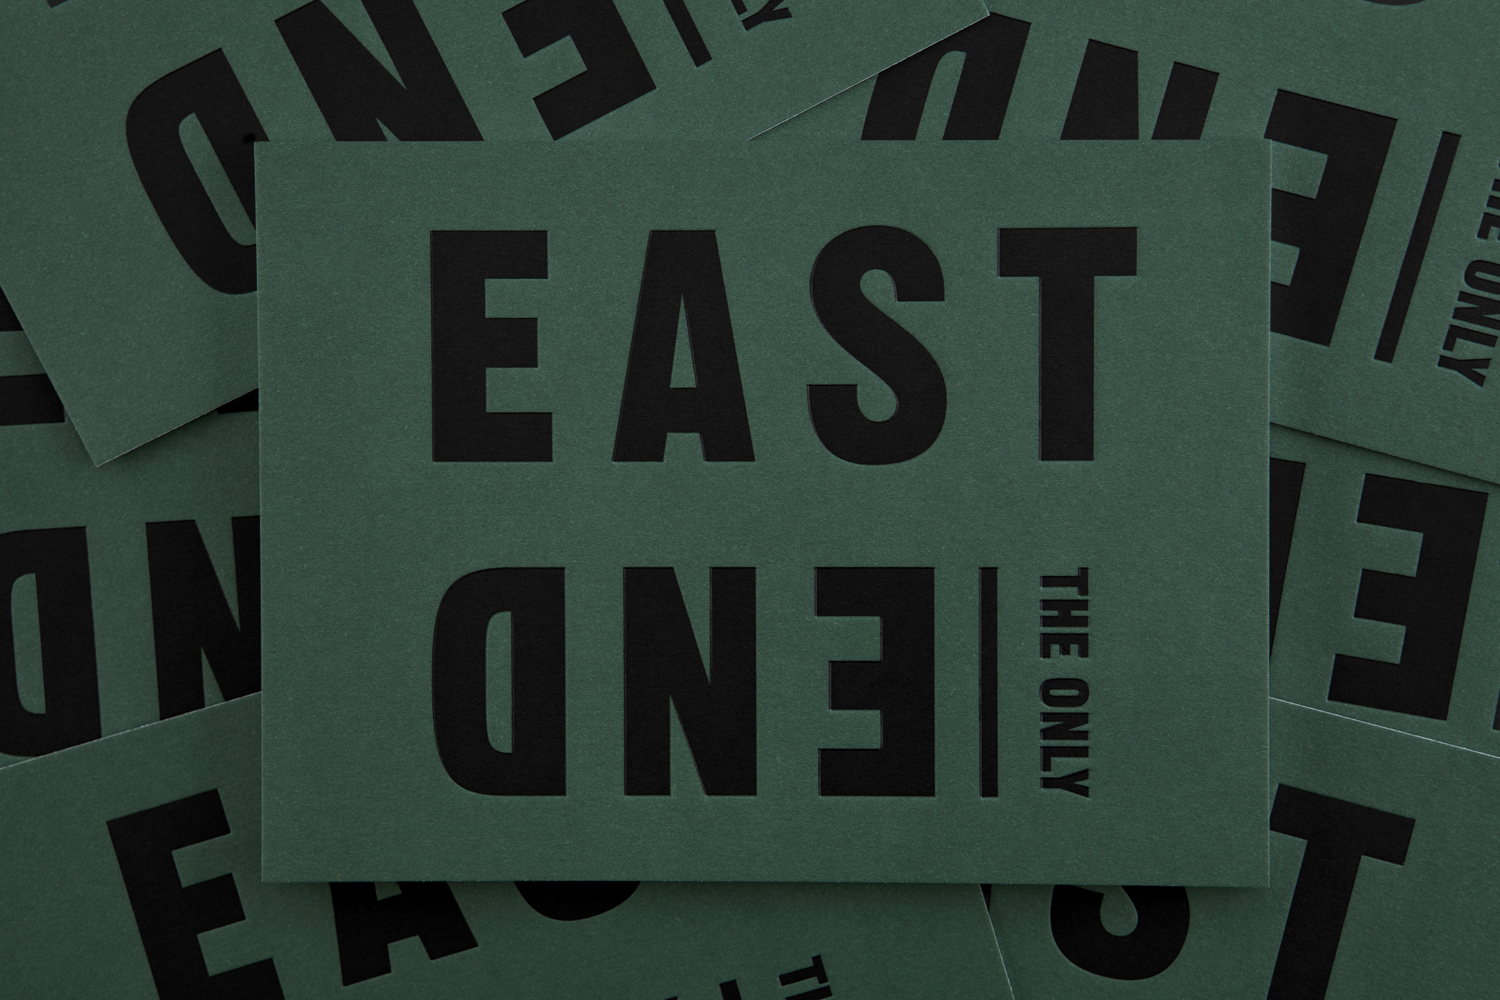 Visual identity and print designed by Blok for Toronto's The Broadview Hotel